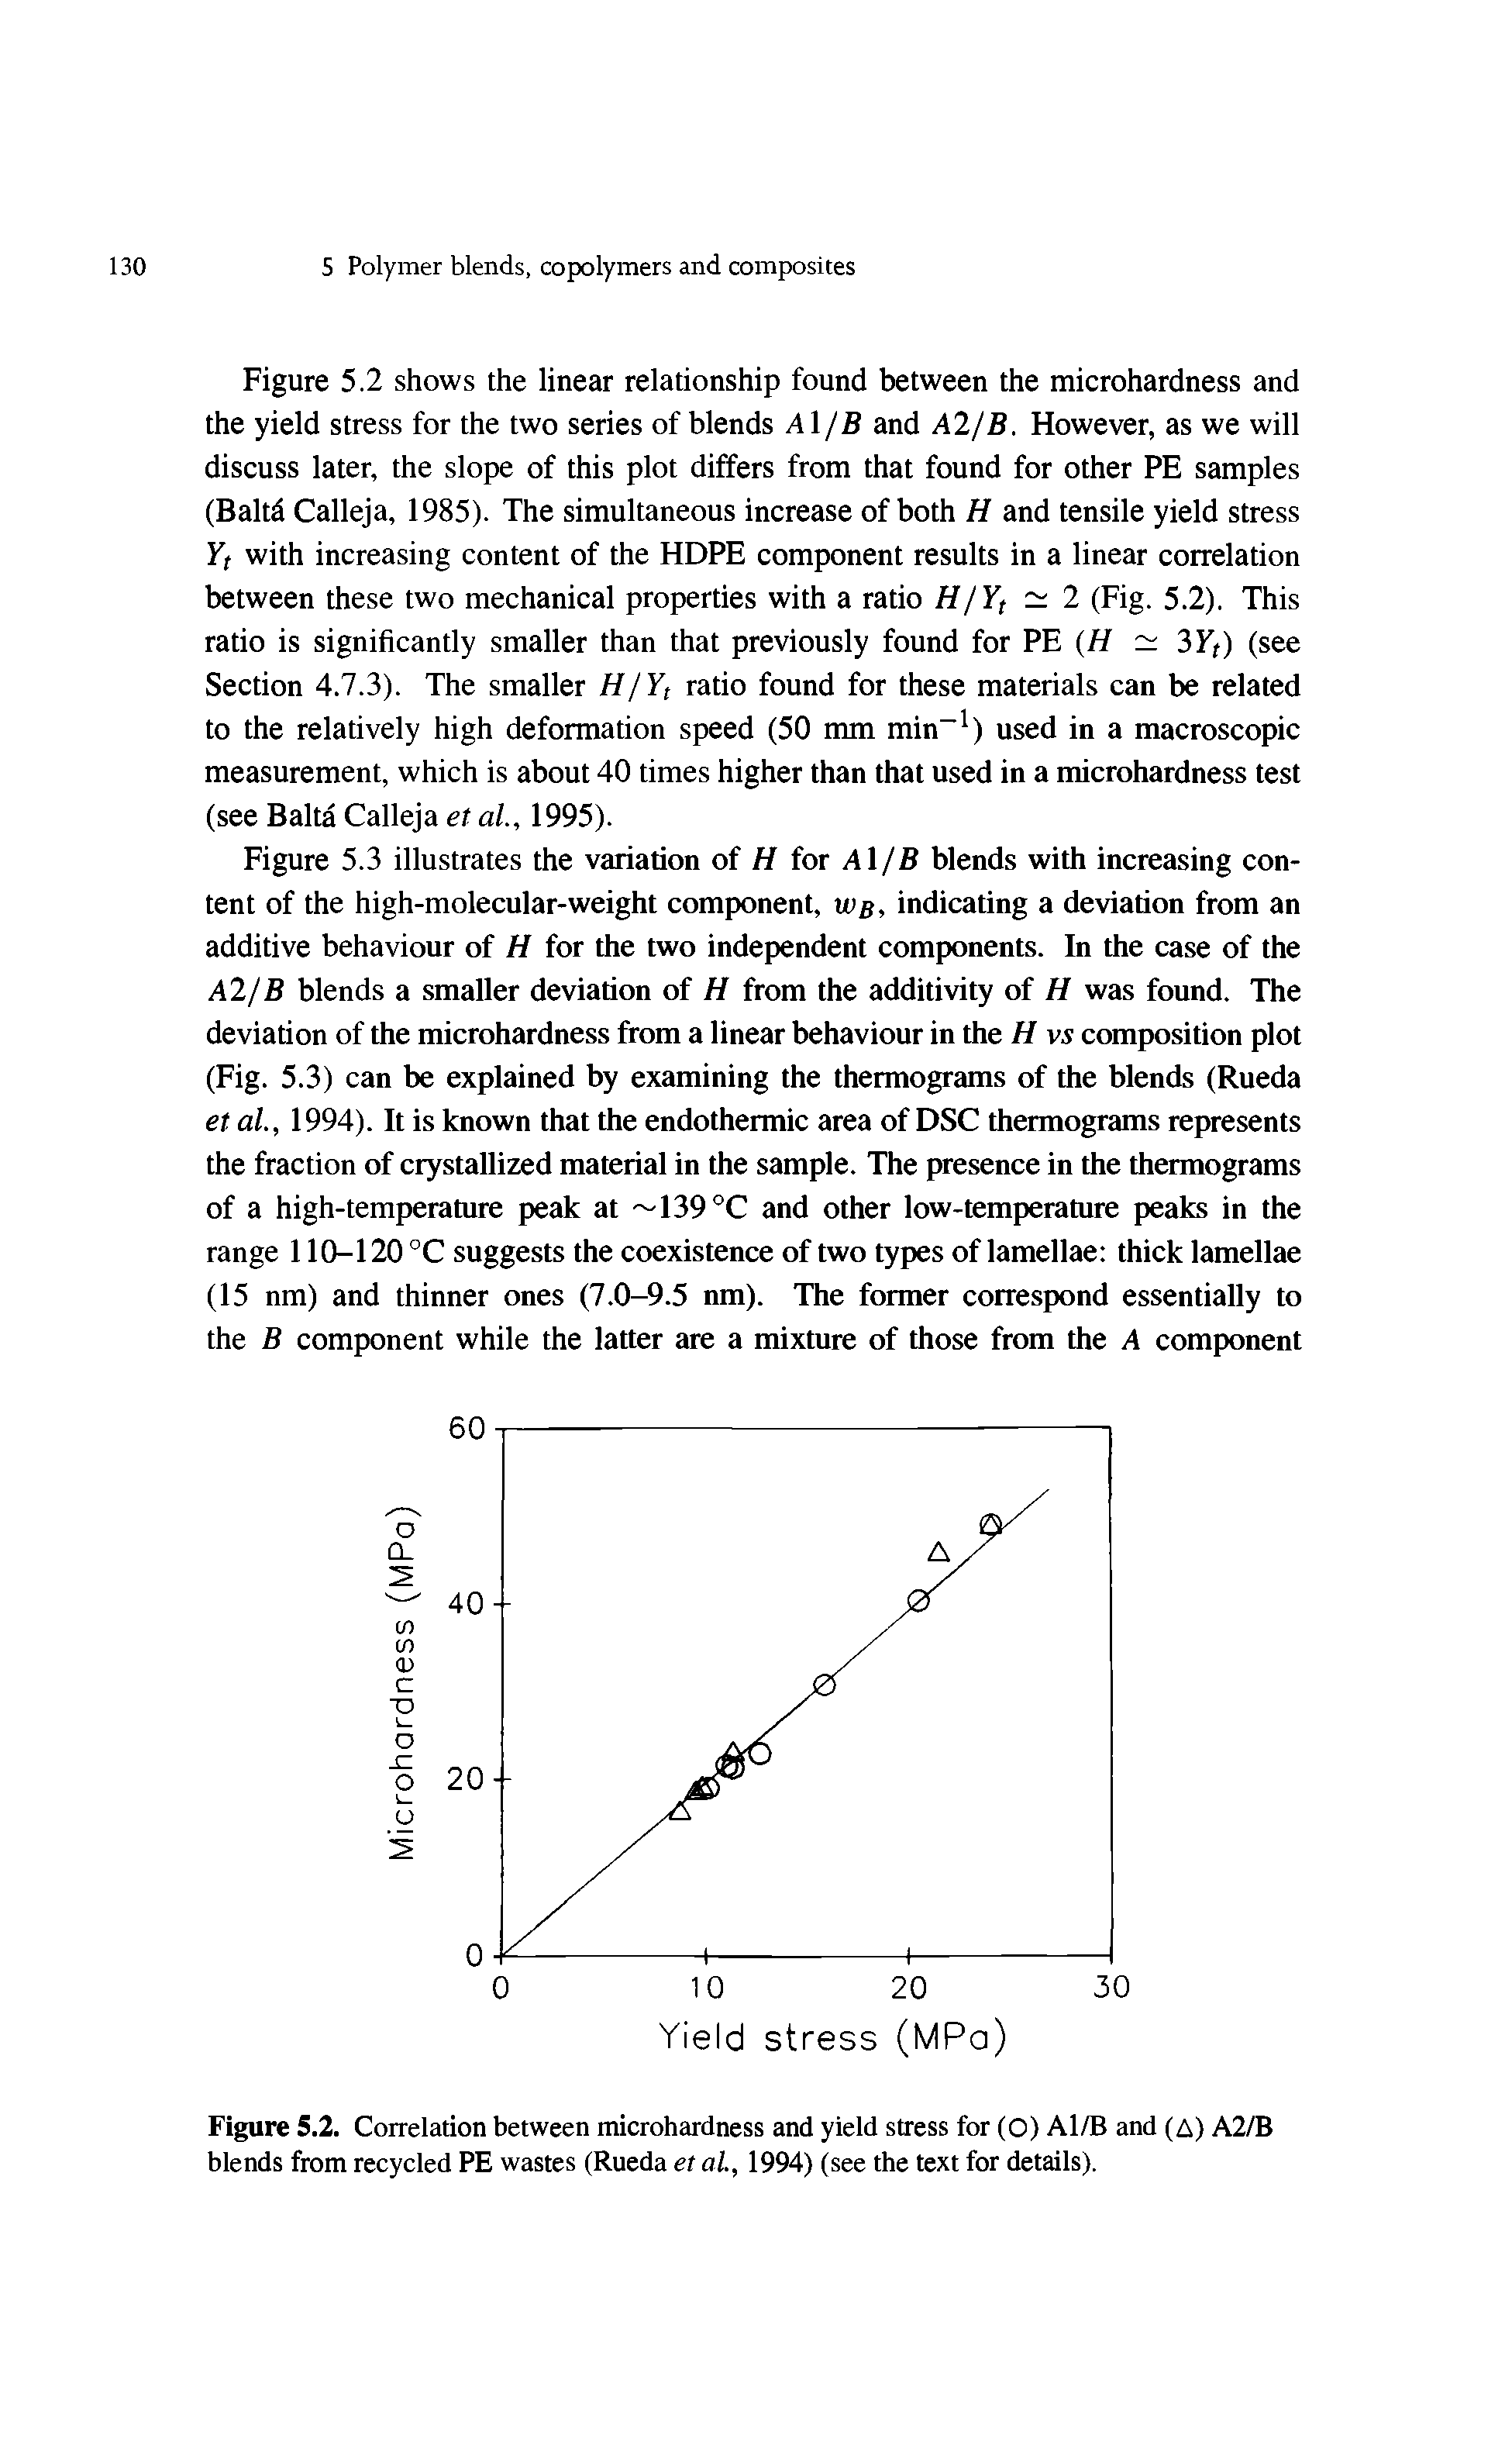 Figure 5.2 shows the linear relationship found between the microhardness and the yield stress for the two series of blends A /B and A2/B. However, as we will discuss later, the slope of this plot differs from that found for other PE samples (Baltd Calleja, 1985). The simultaneous increase of both H and tensile yield stress Yt with increasing content of the HOPE component results in a linear correlation between these two mechanical properties with a ratio H/Yf 2 2 (Fig. 5.2). This ratio is significantly smaller than that previously found for PE (H 3Tf) (see Section 4.7.3). The smaller H/Yt ratio found for these materials can be related to the relatively high deformation speed (50 mm min ) used in a macroscopic measurement, which is about 40 times higher than that used in a microhardness test (see Balta Calleja et al., 1995).